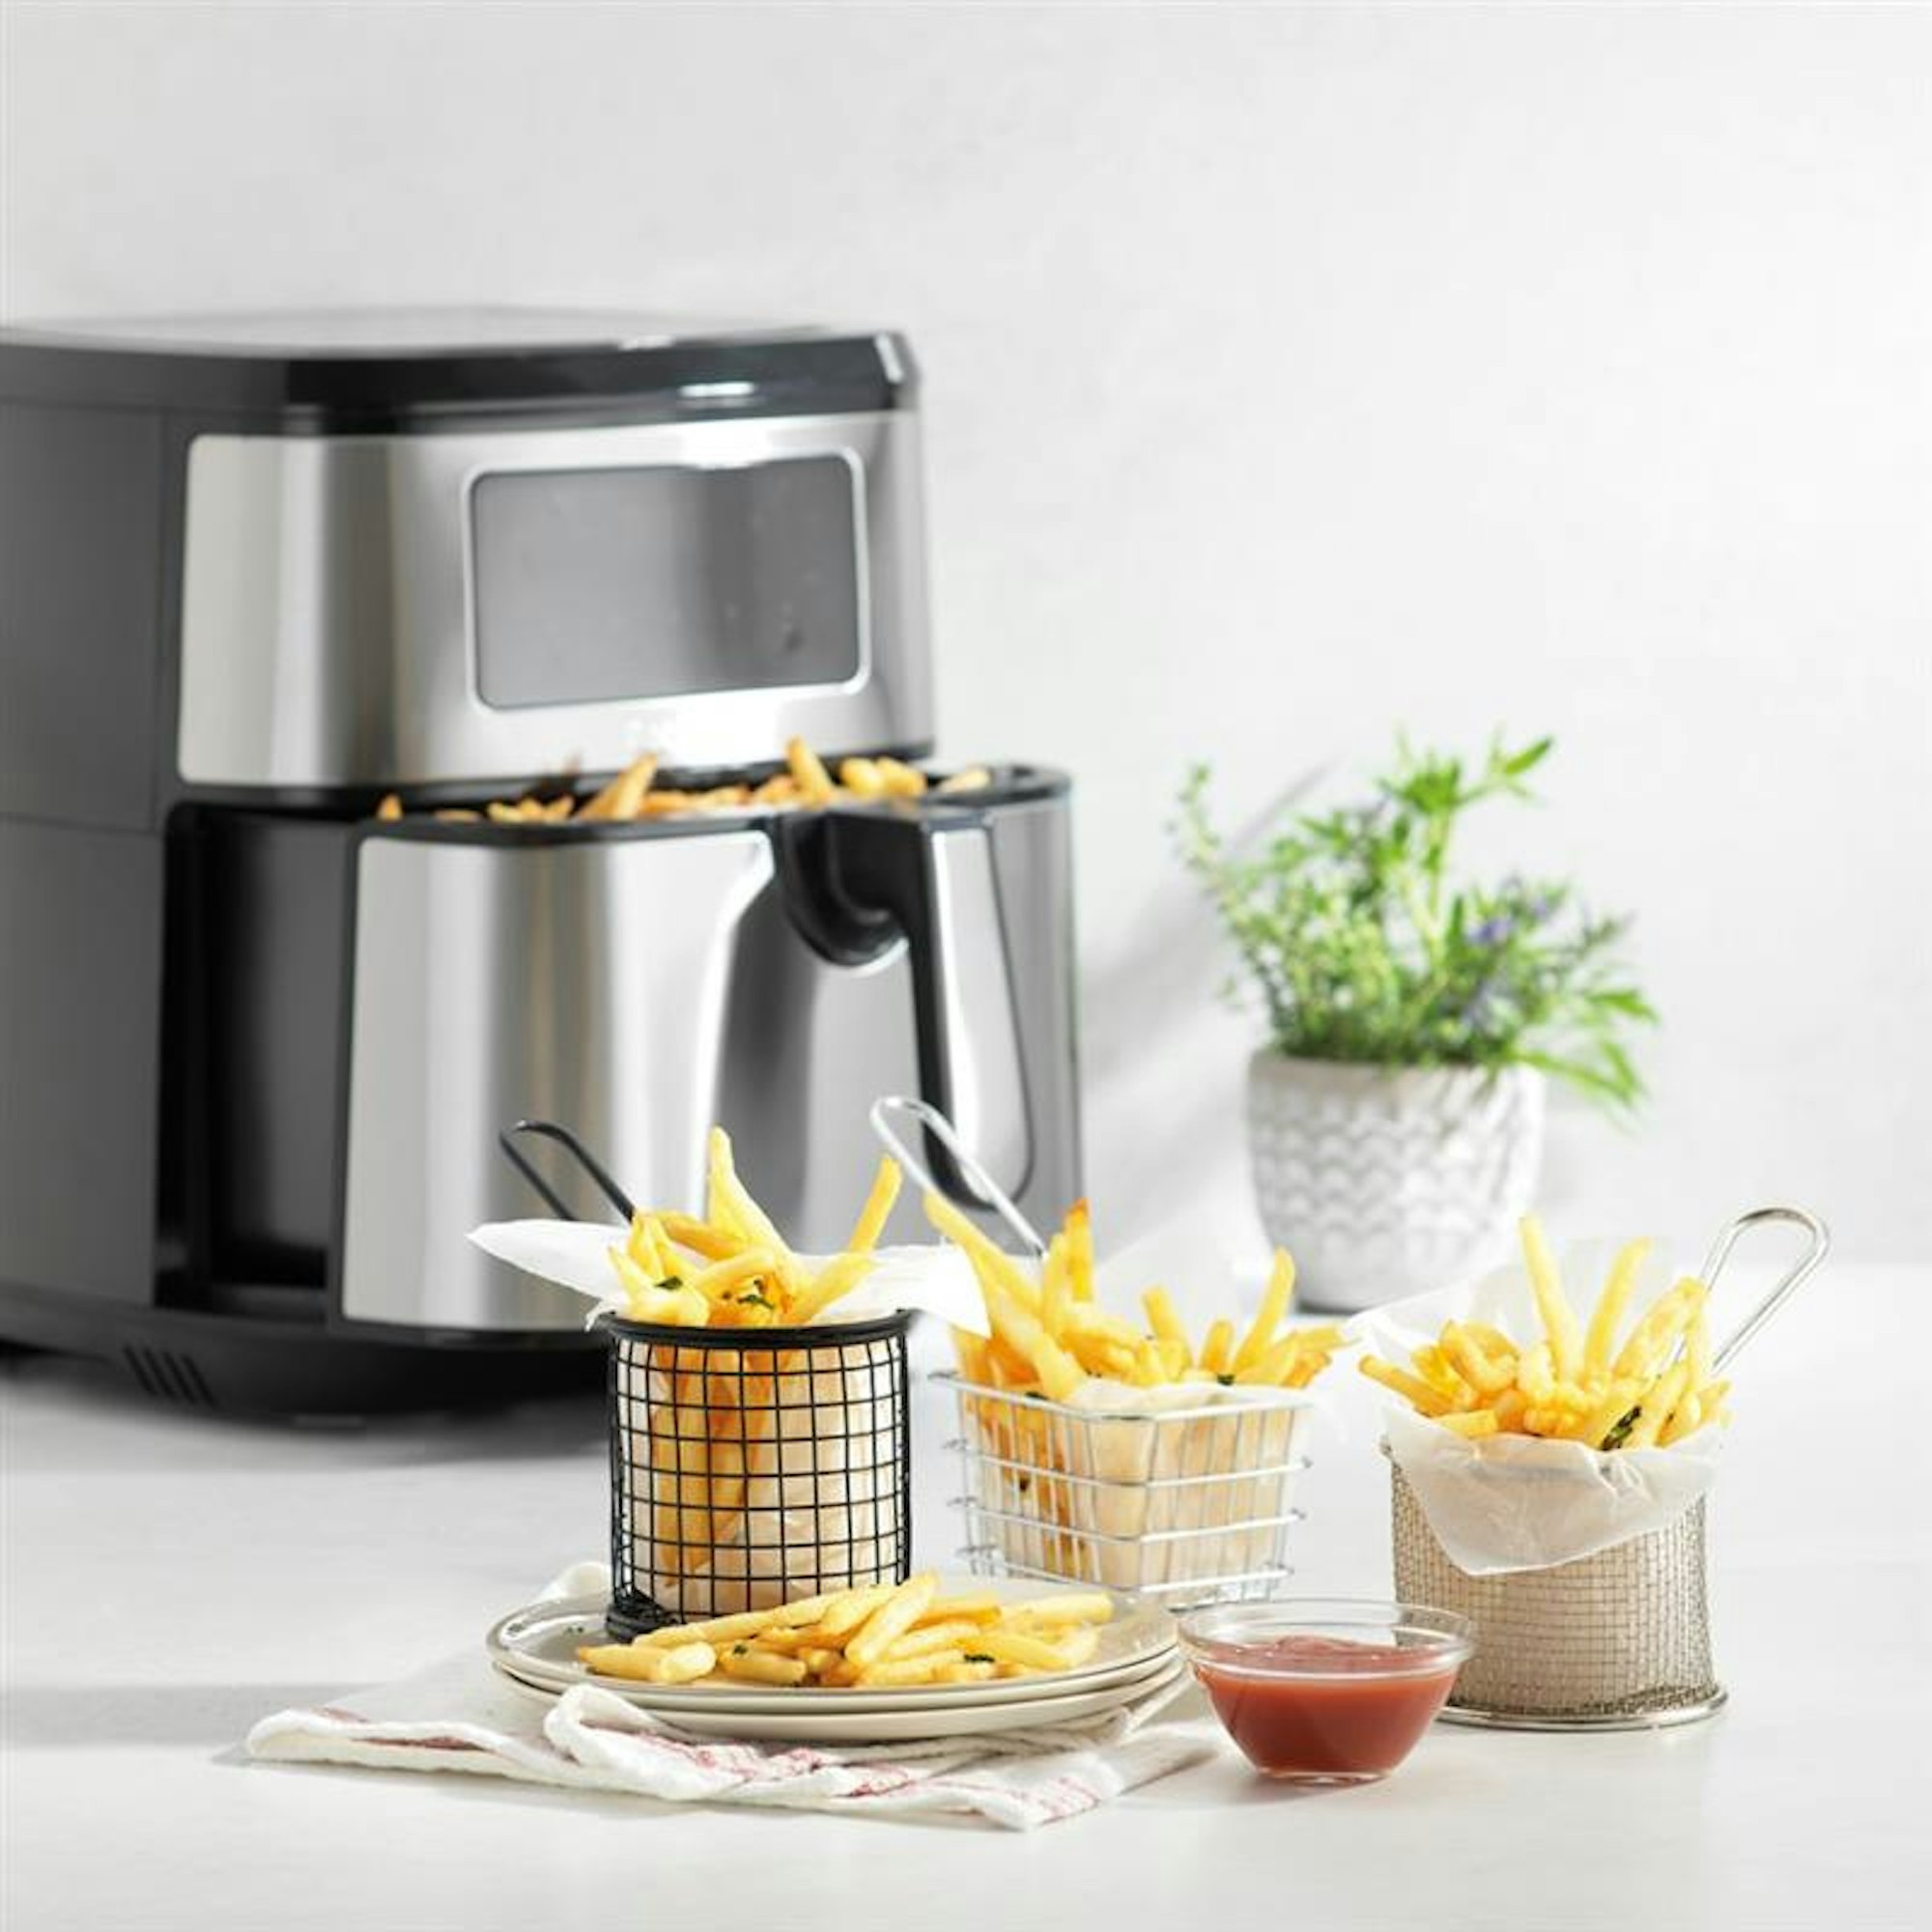 Silver air fryer with chips